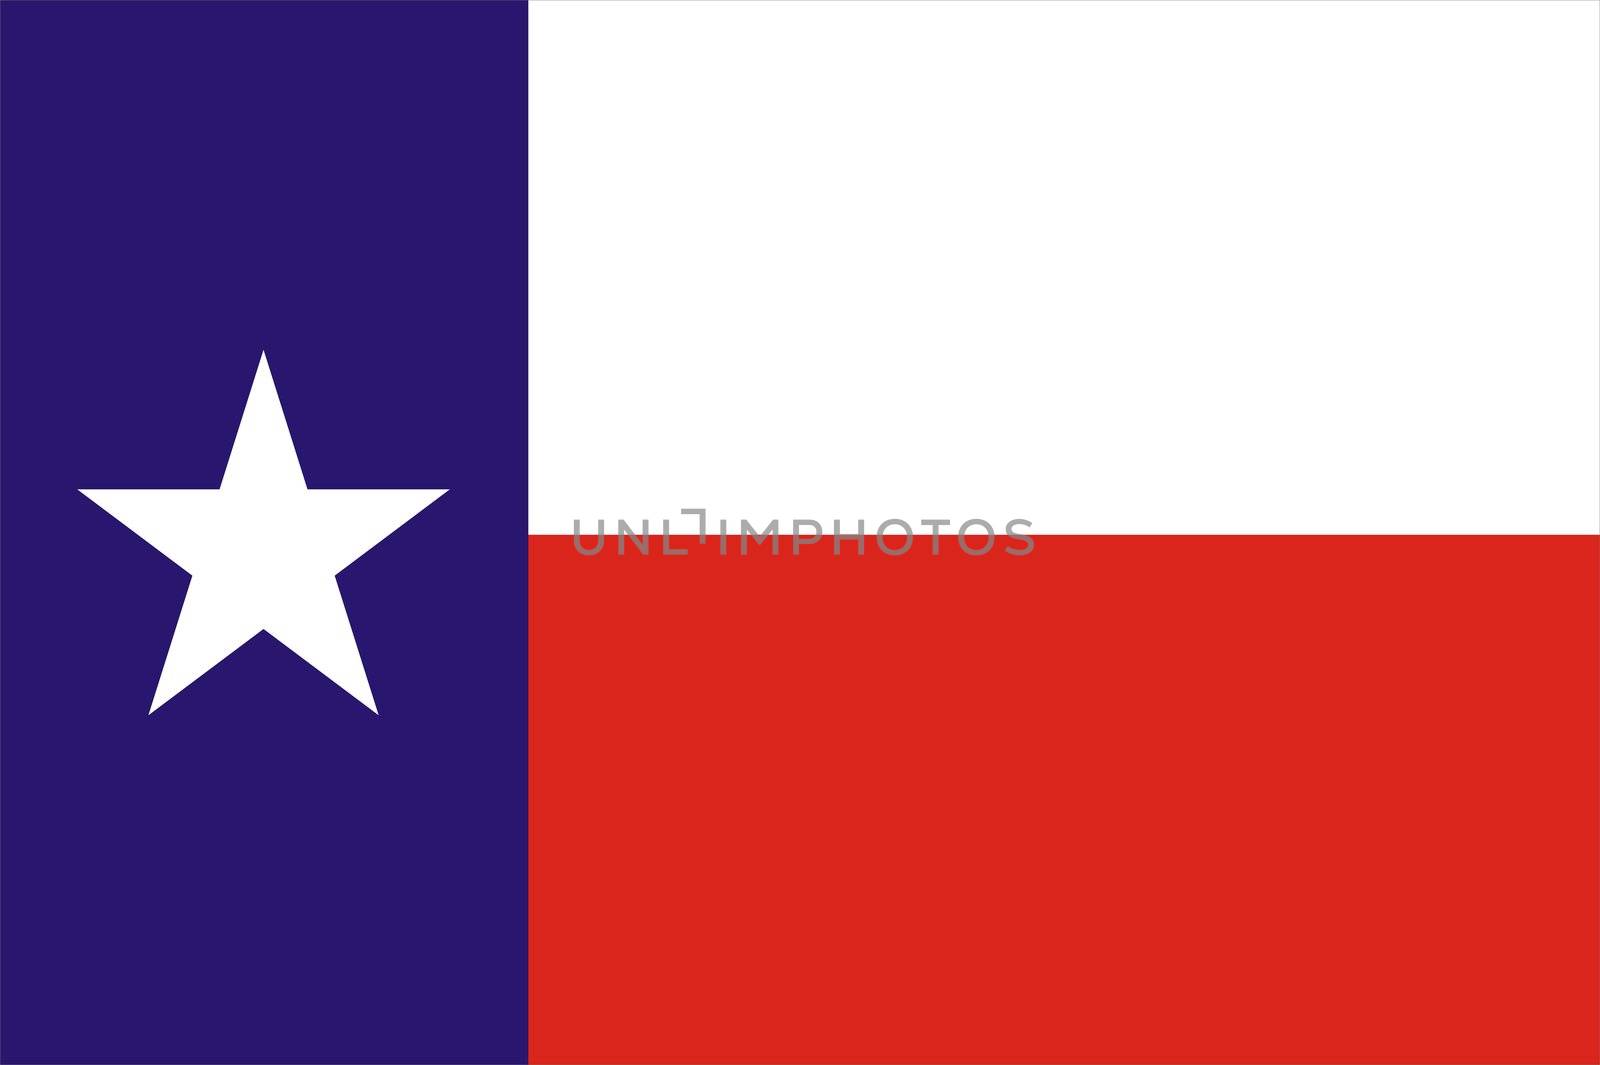 2D illustration of Texas flag american state vector
